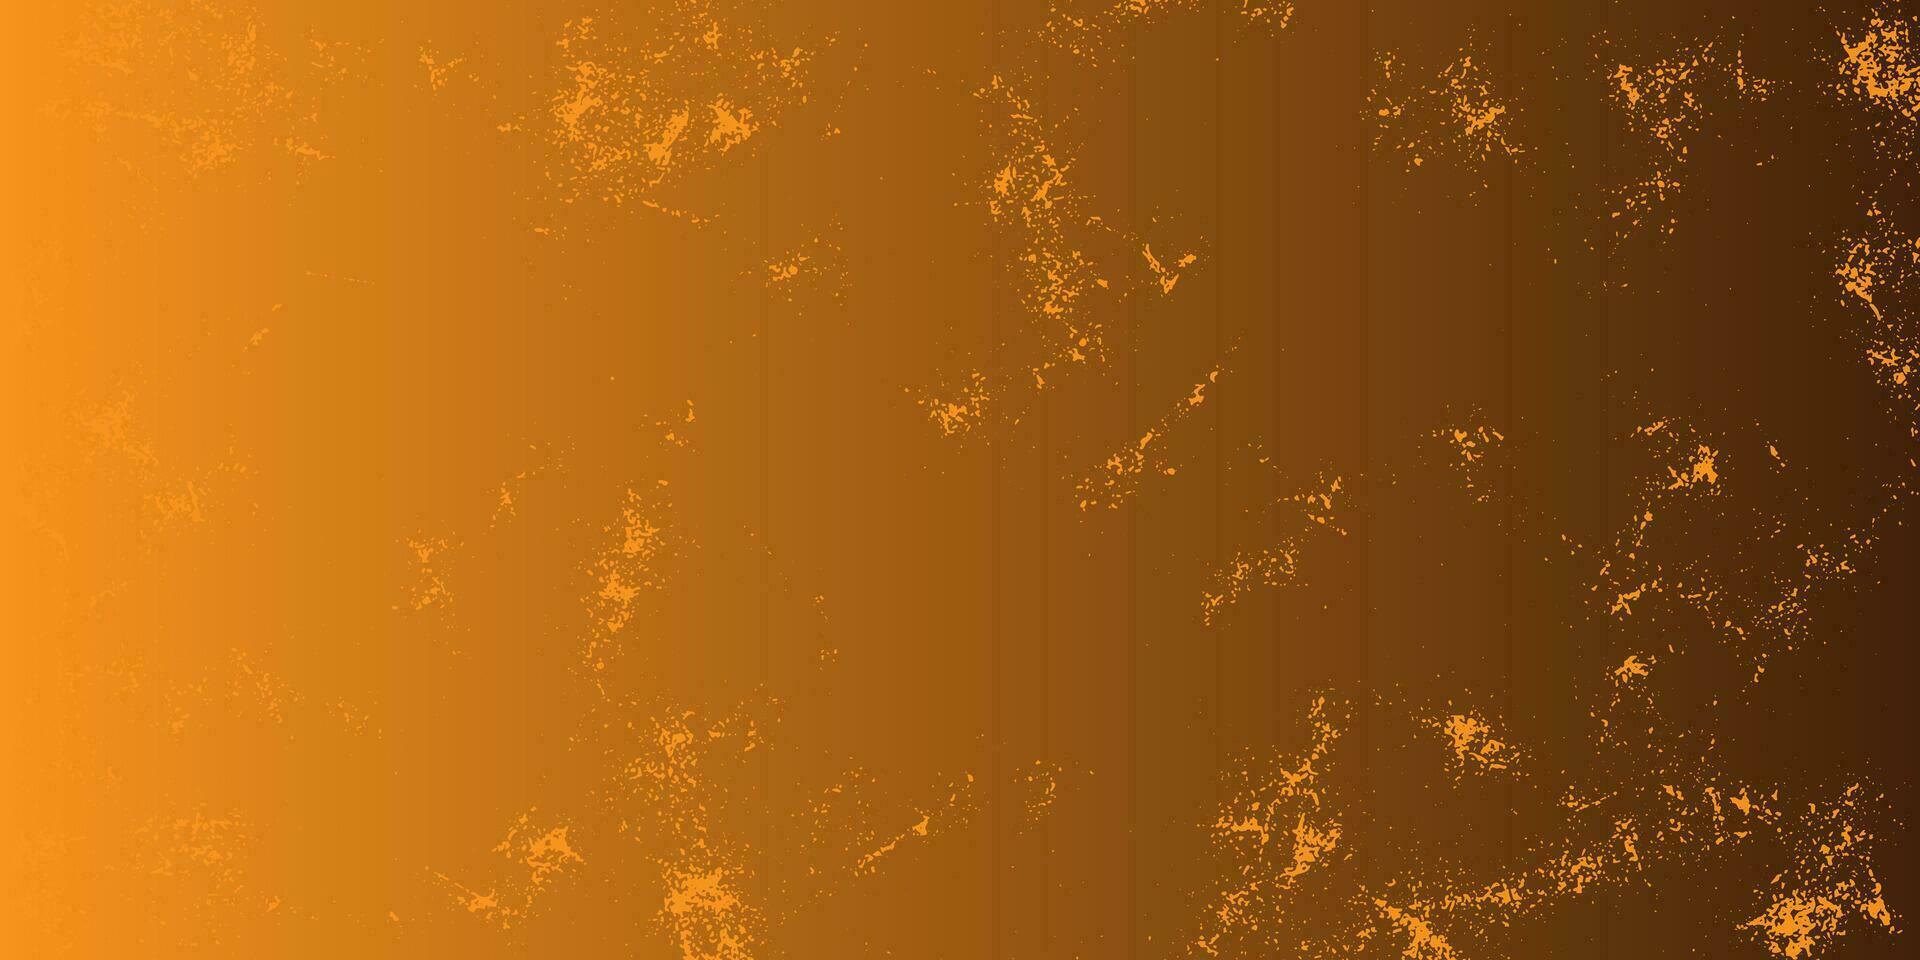 a grunge texture background with orange and brown colors vector